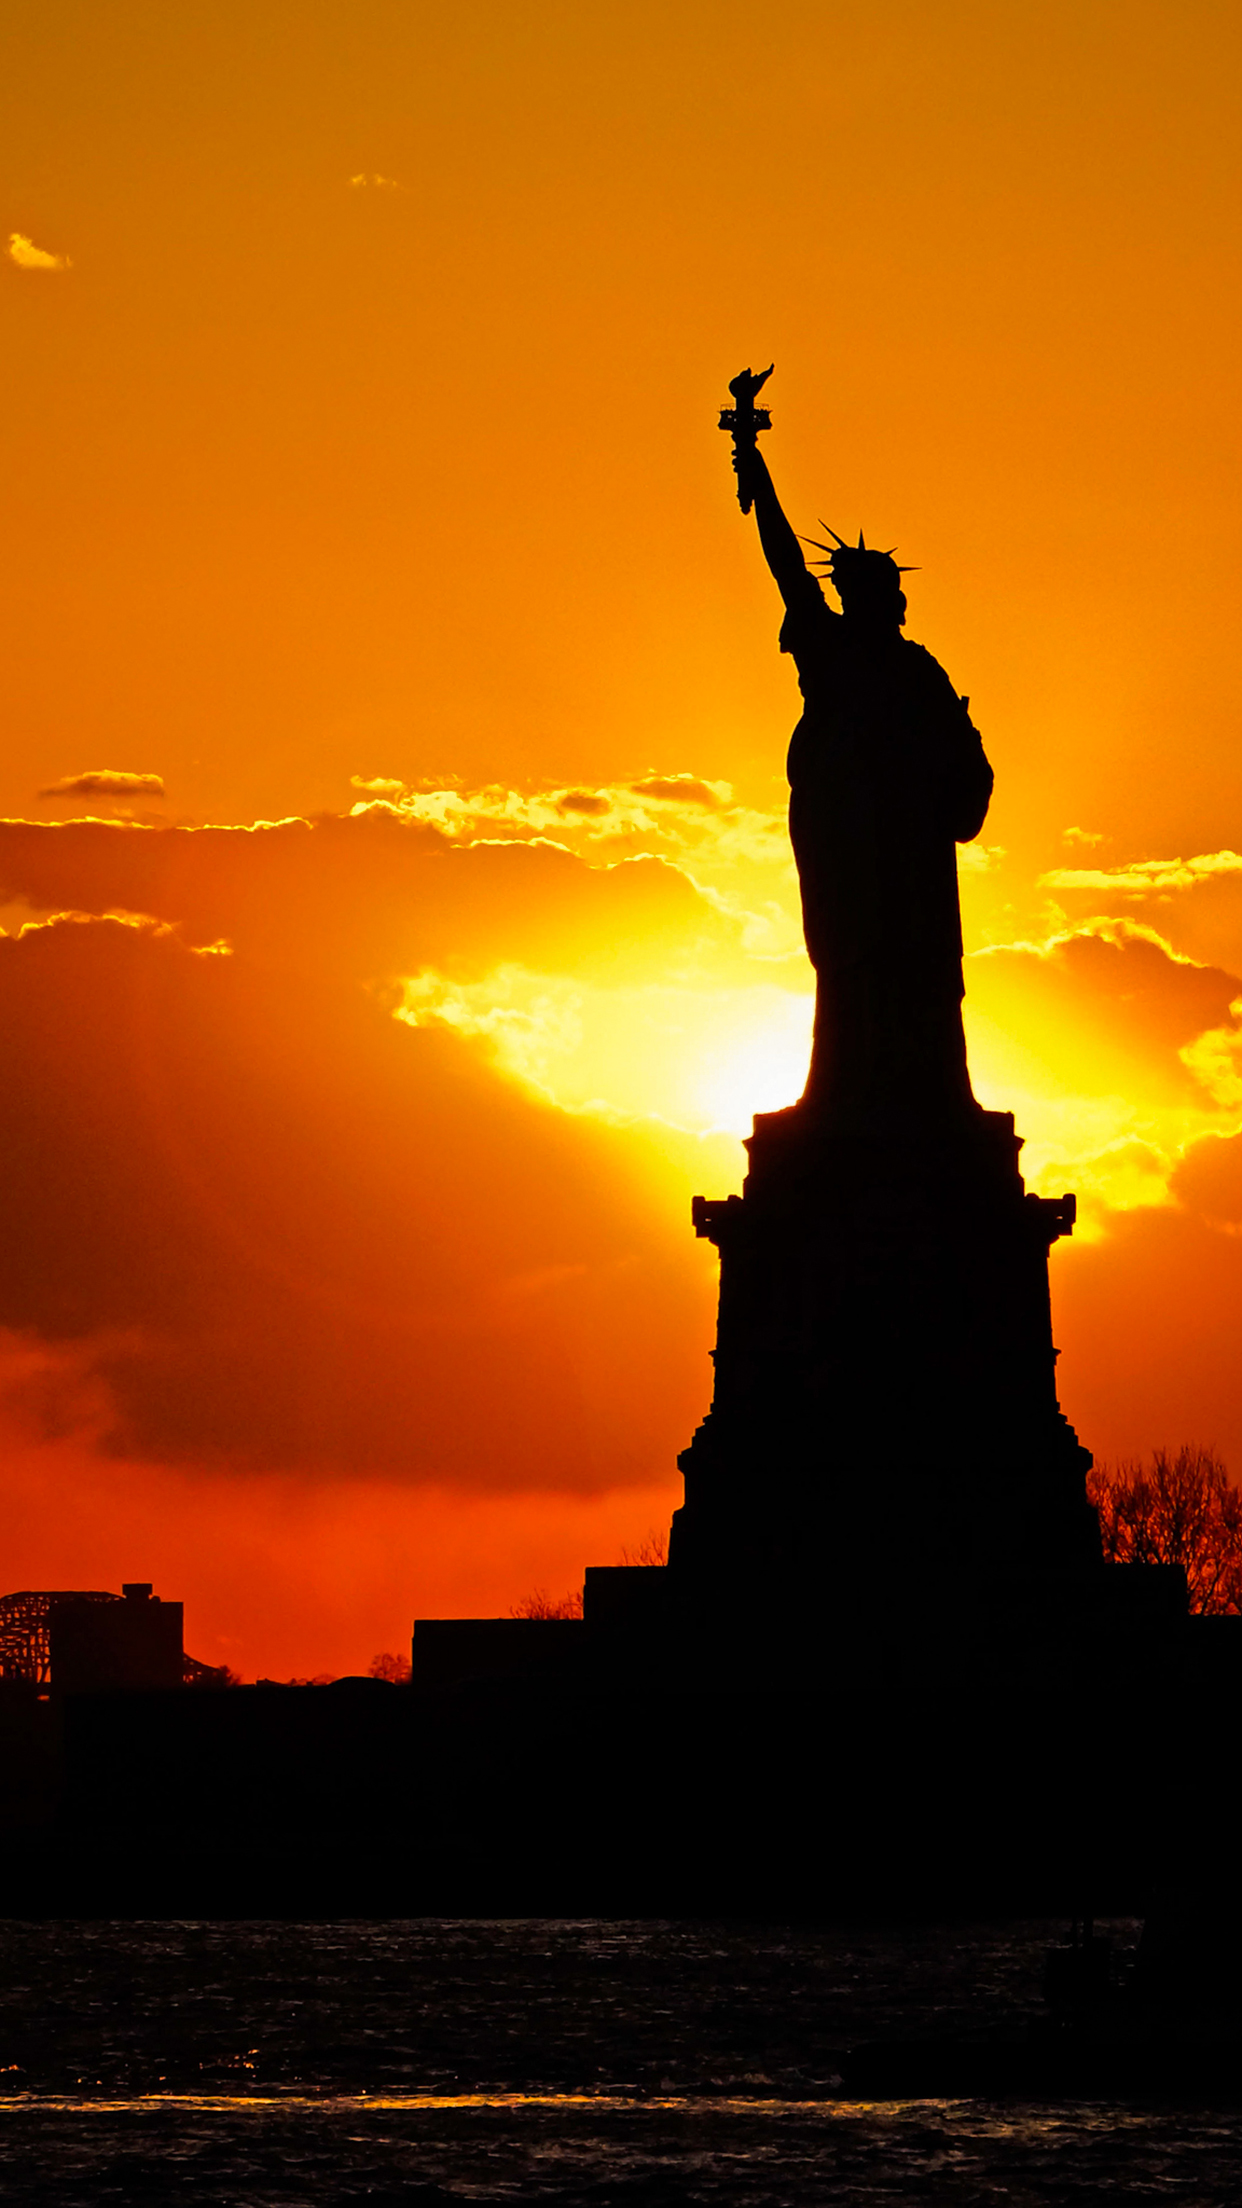 Sunset behind Statue of Liberty Wallpaper for iPhone Pro Max, X, 6